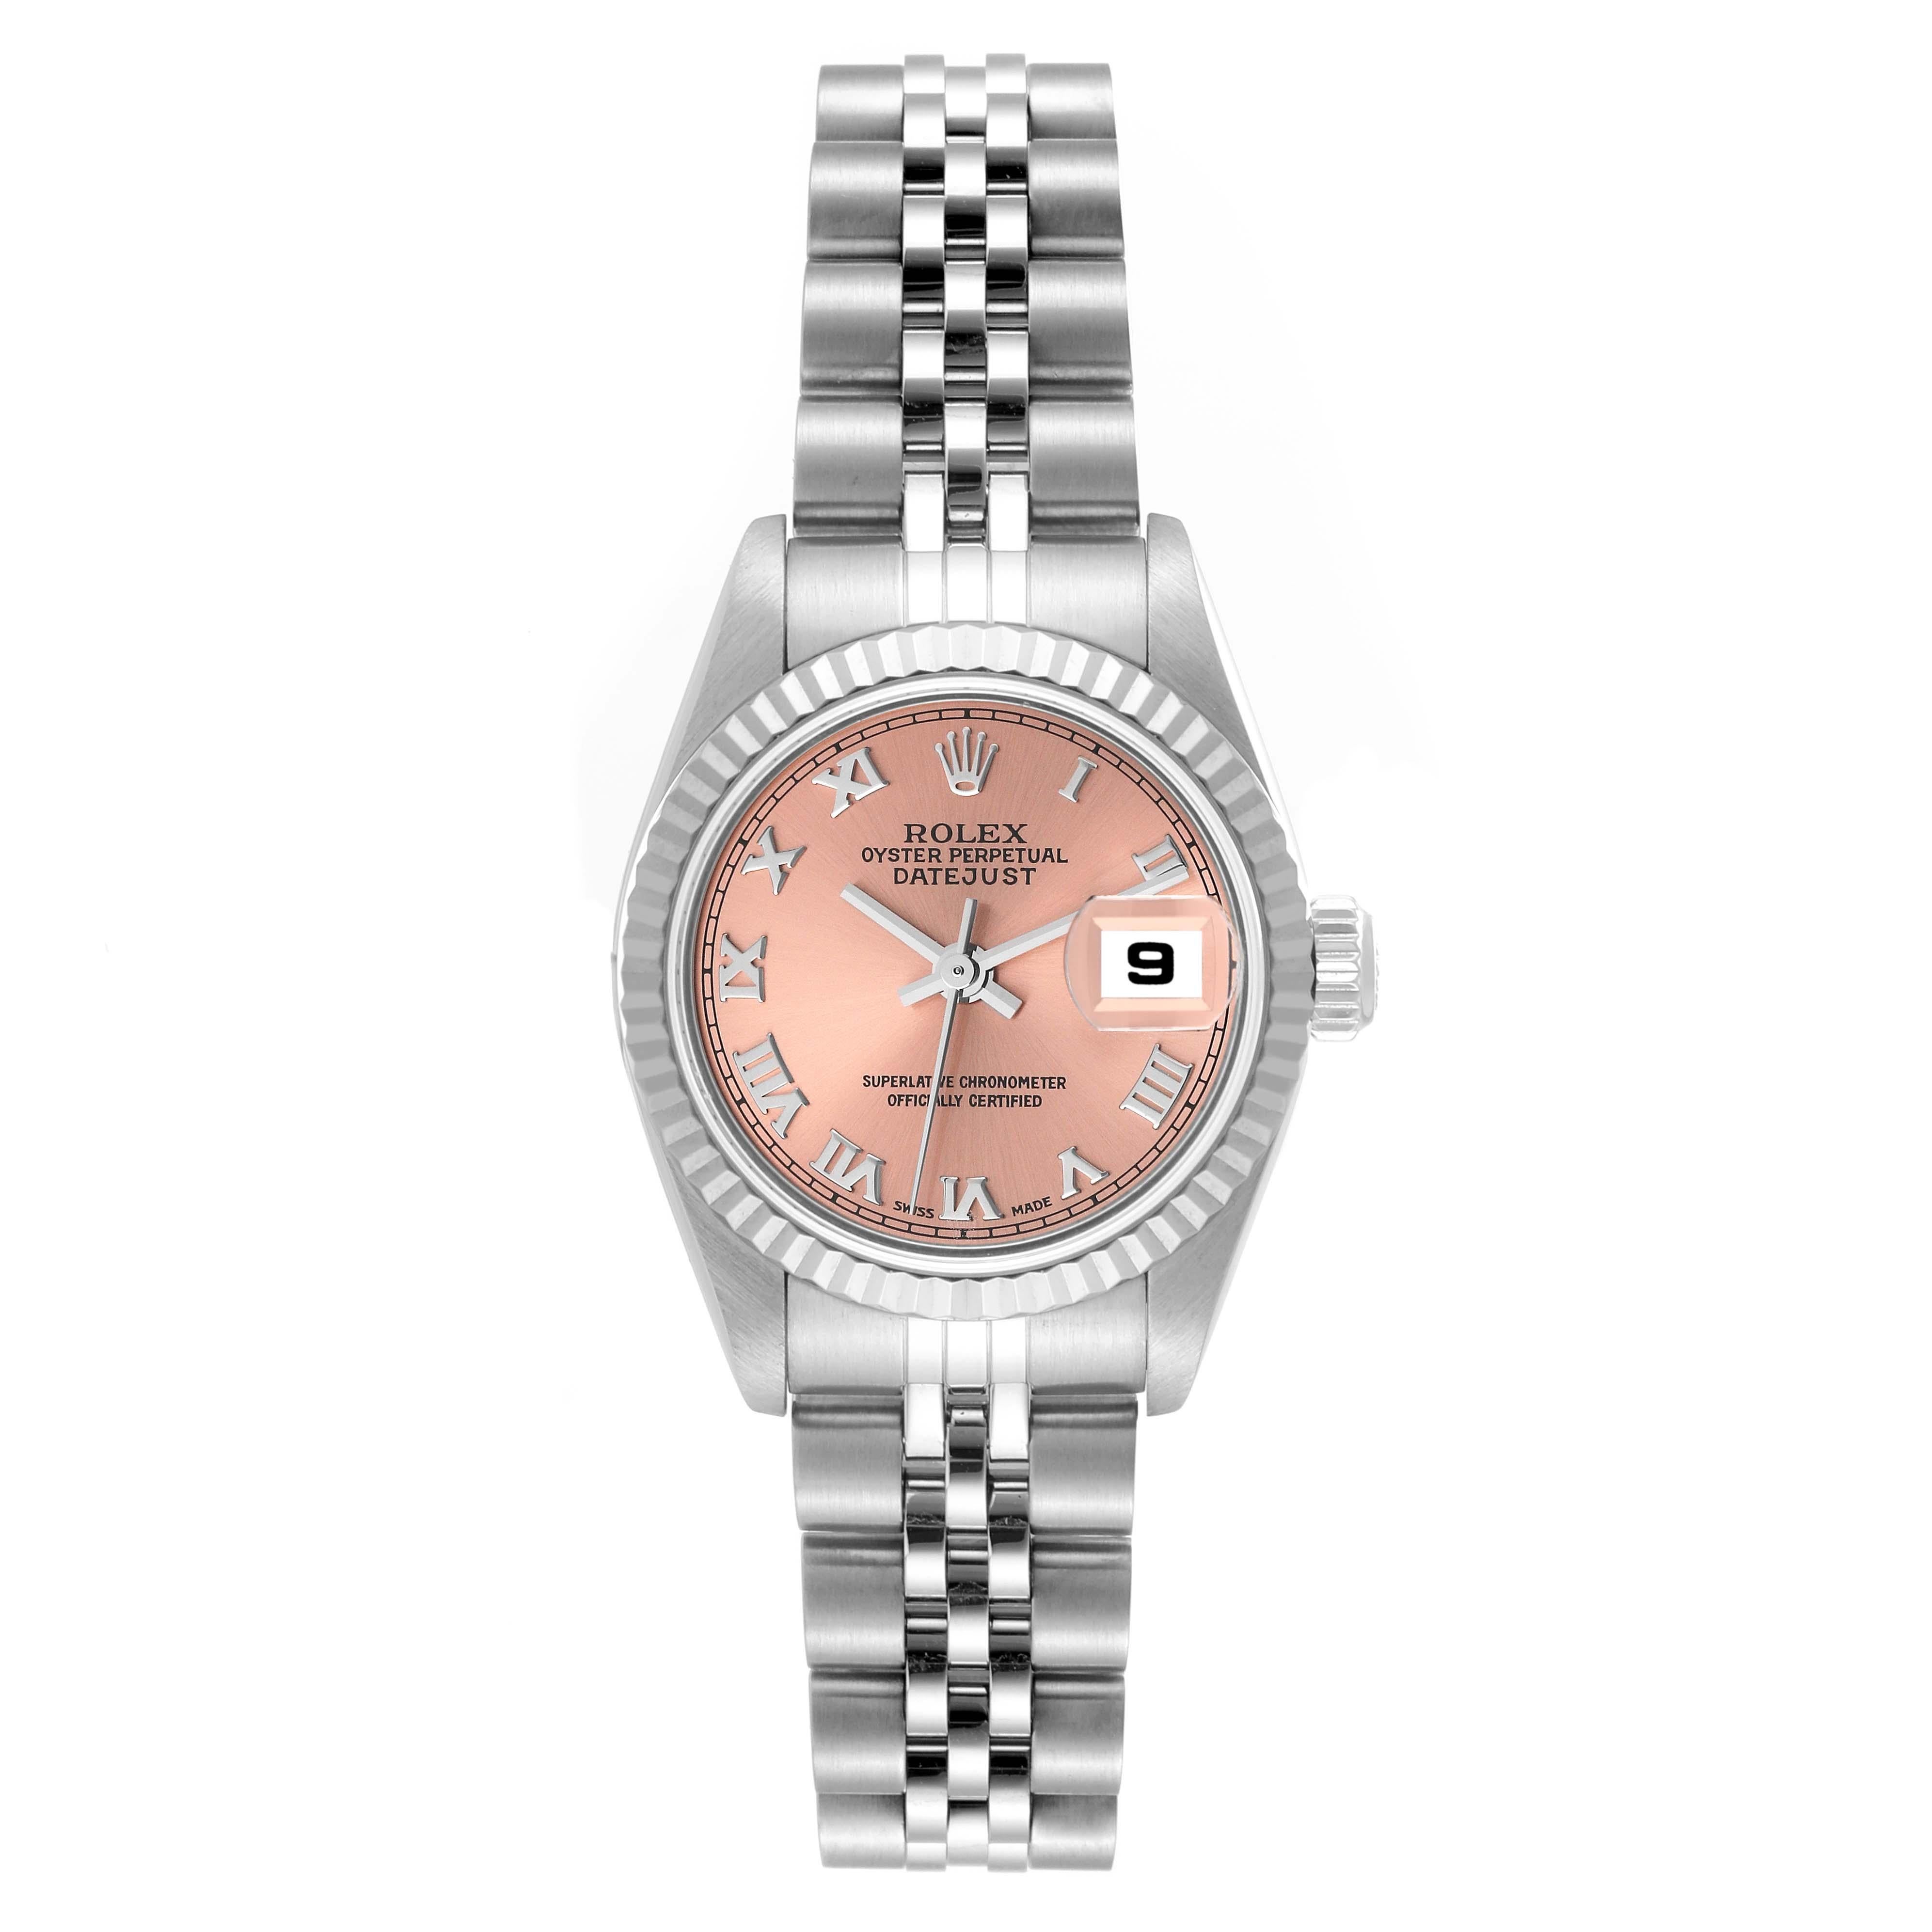 Rolex Datejust White Gold Salmon Dial Steel Ladies Watch 79174 Box Papers. Officially certified chronometer automatic self-winding movement. Stainless steel oyster case 26.0 mm in diameter. Rolex logo on the crown. 18K white gold fluted bezel.